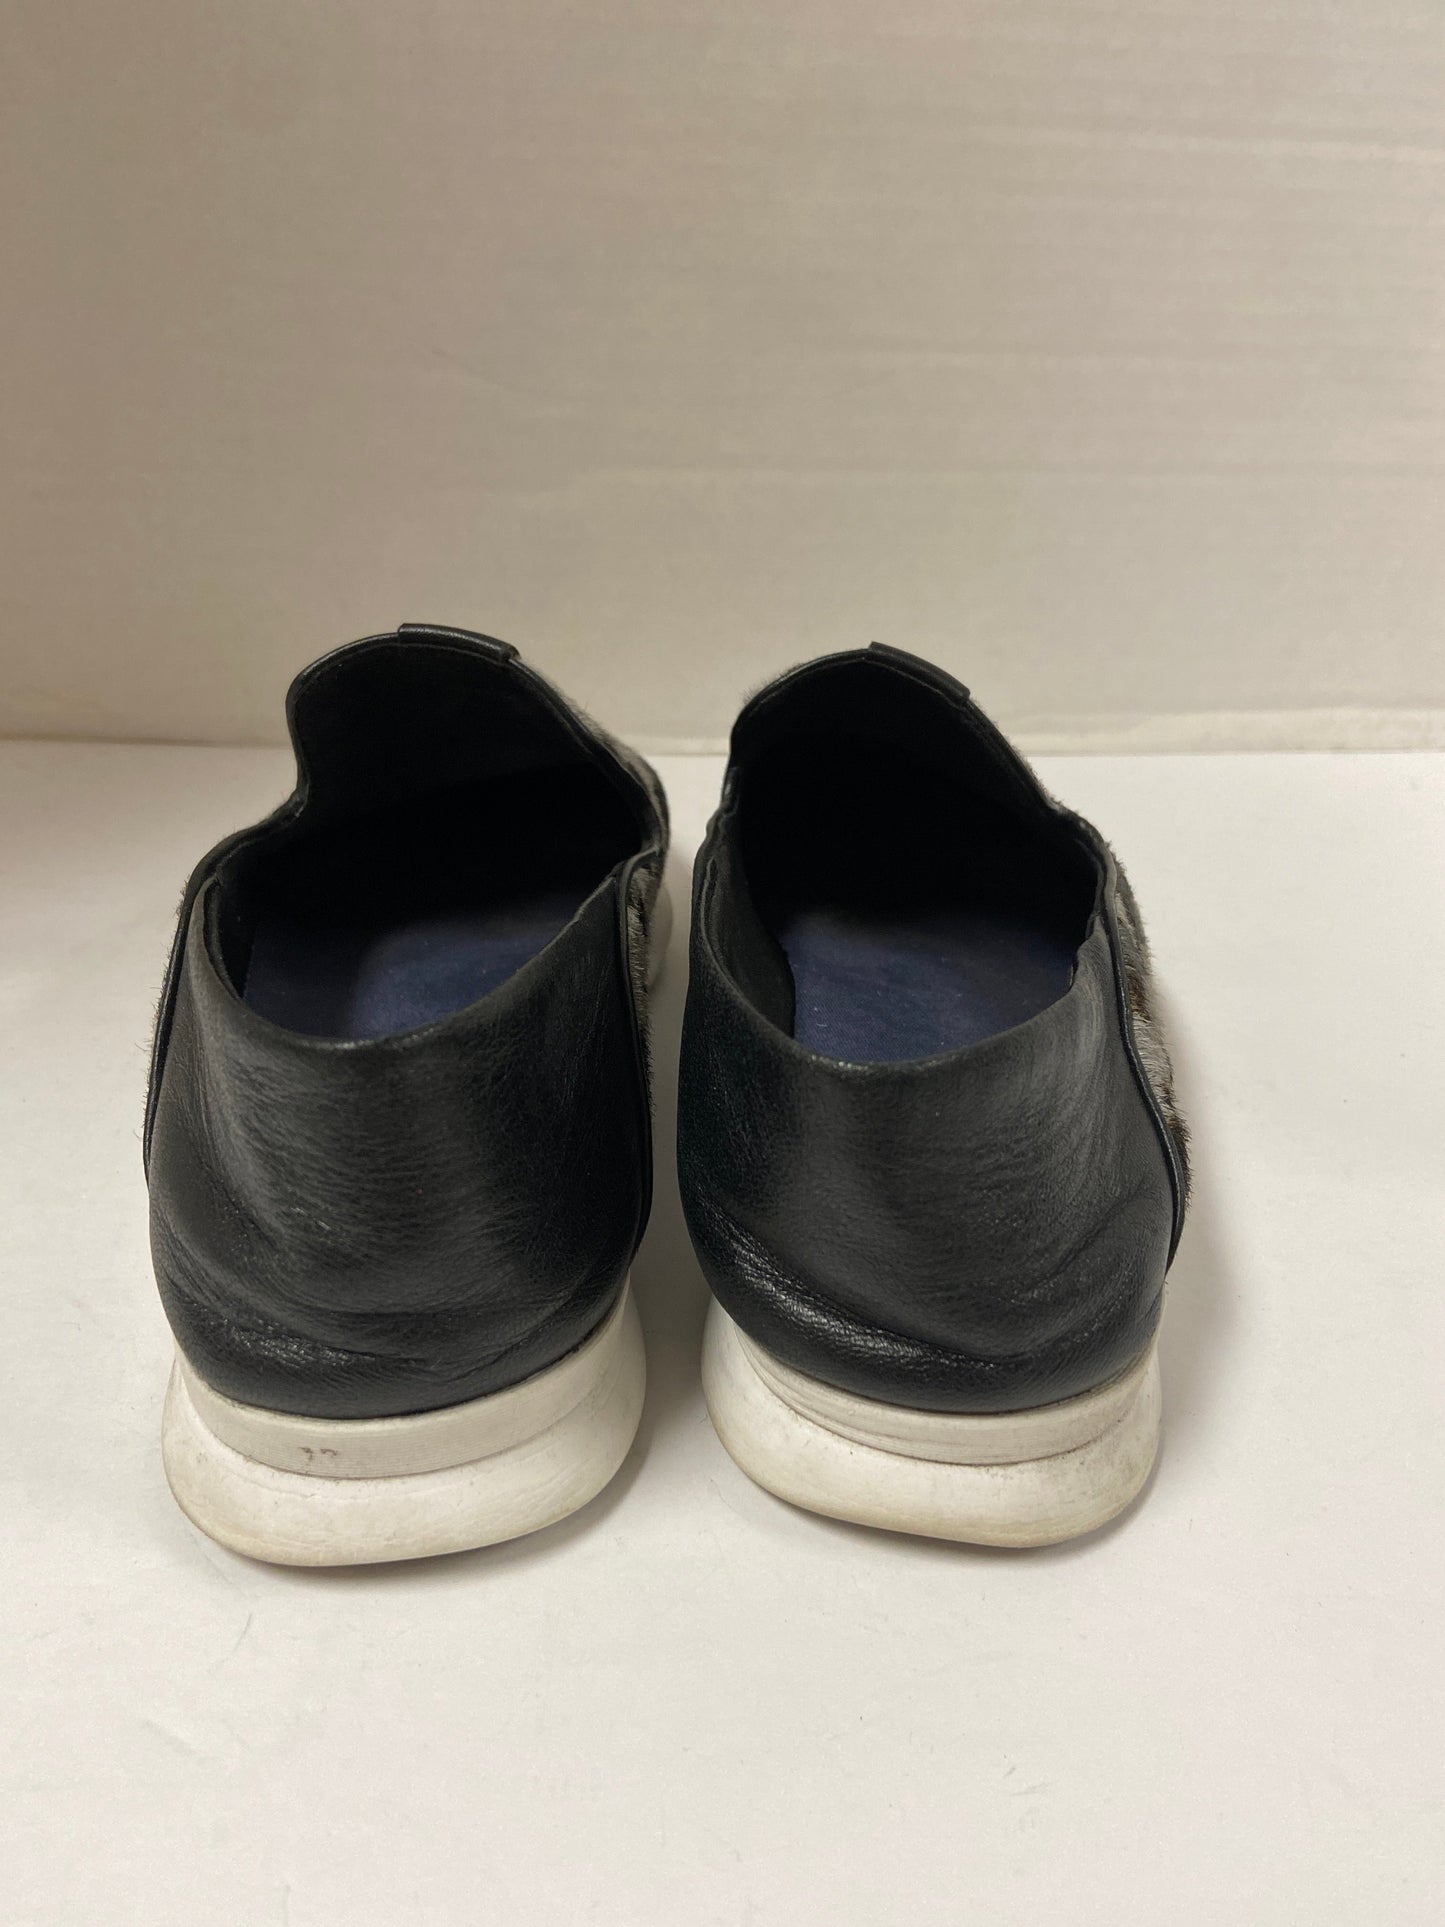 Shoes Designer By Cole-haan  Size: 7.5